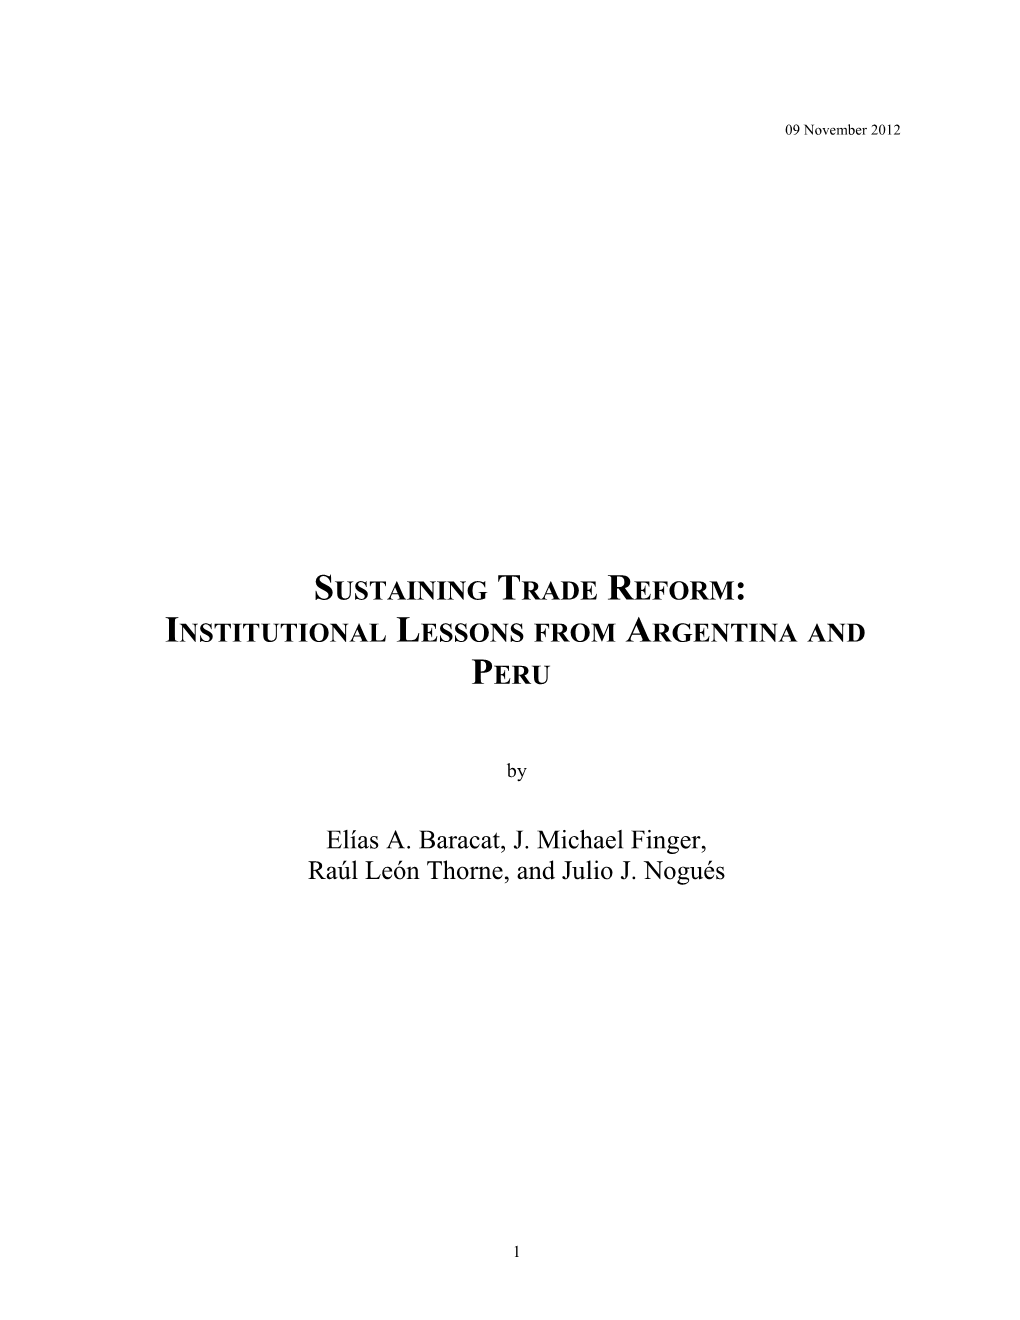 The Trade Restrictions That Were Eliminated in the Policy Reforms of Latin American Countries